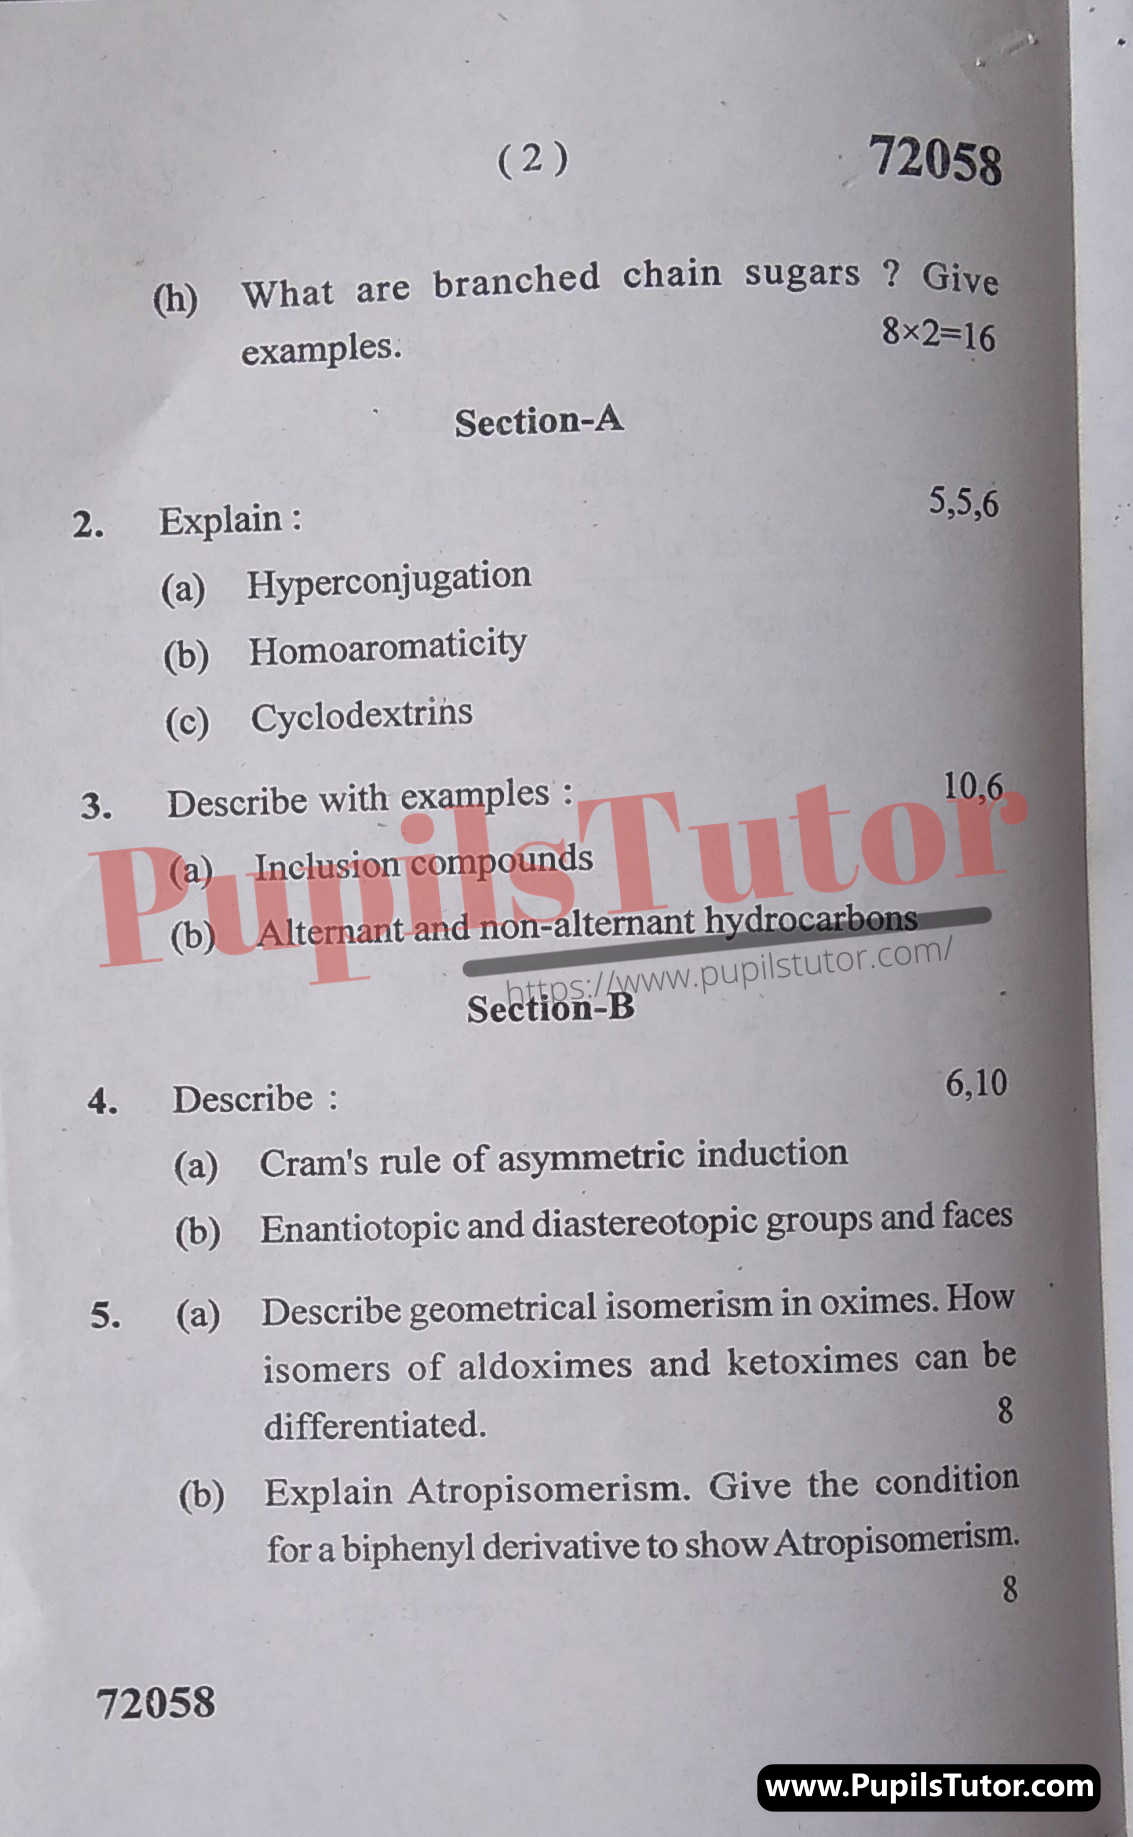 M.D. University M.Sc. [Chemistry] Organic Chemistry-I First Semester Important Question Answer And Solution - www.pupilstutor.com (Paper Page Number 2)